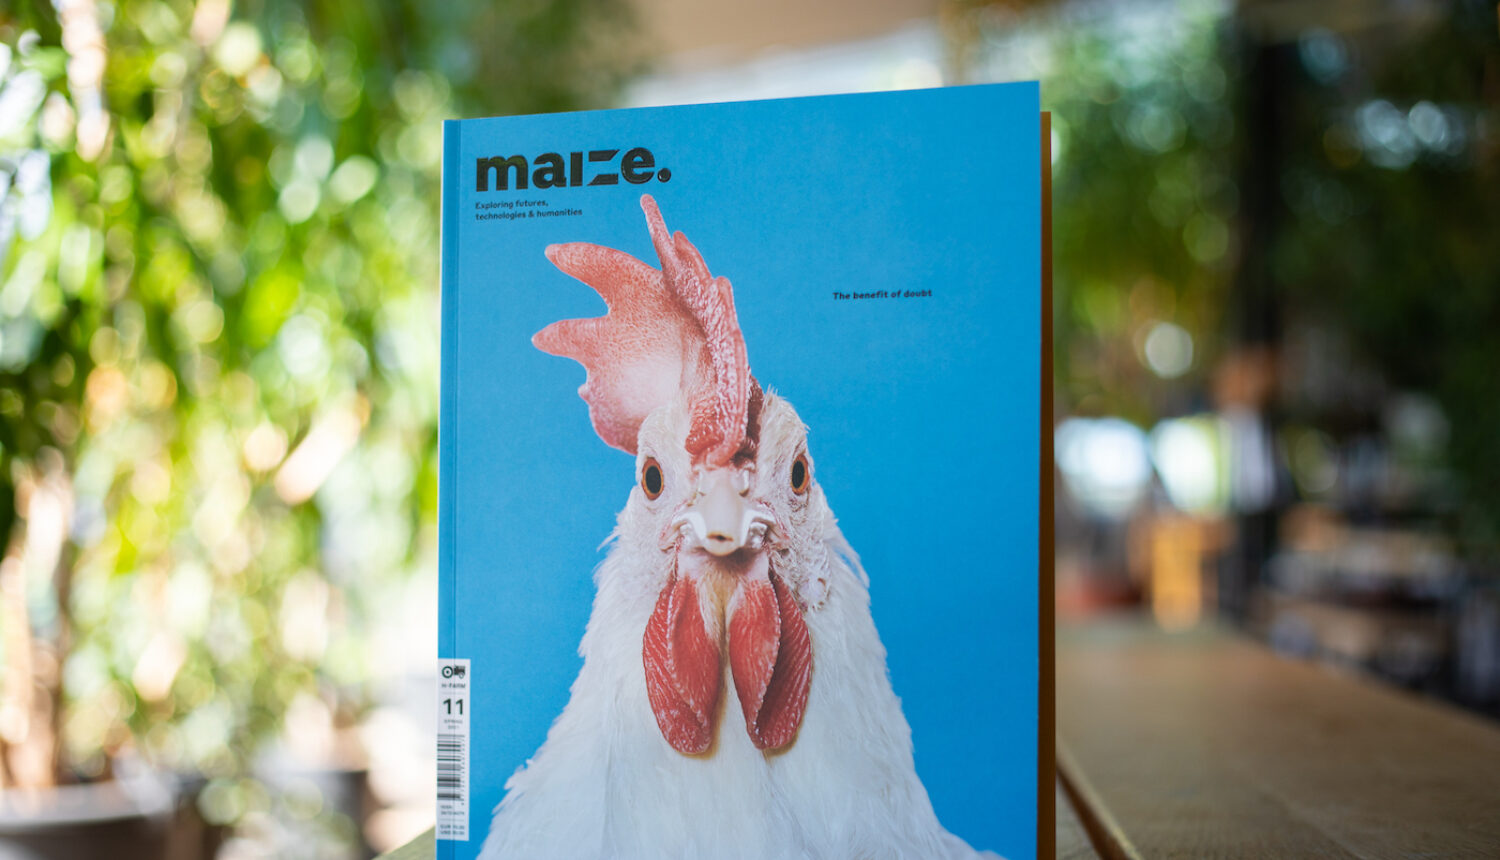 maize.MAGAZINE no.11: The benefit of doubt